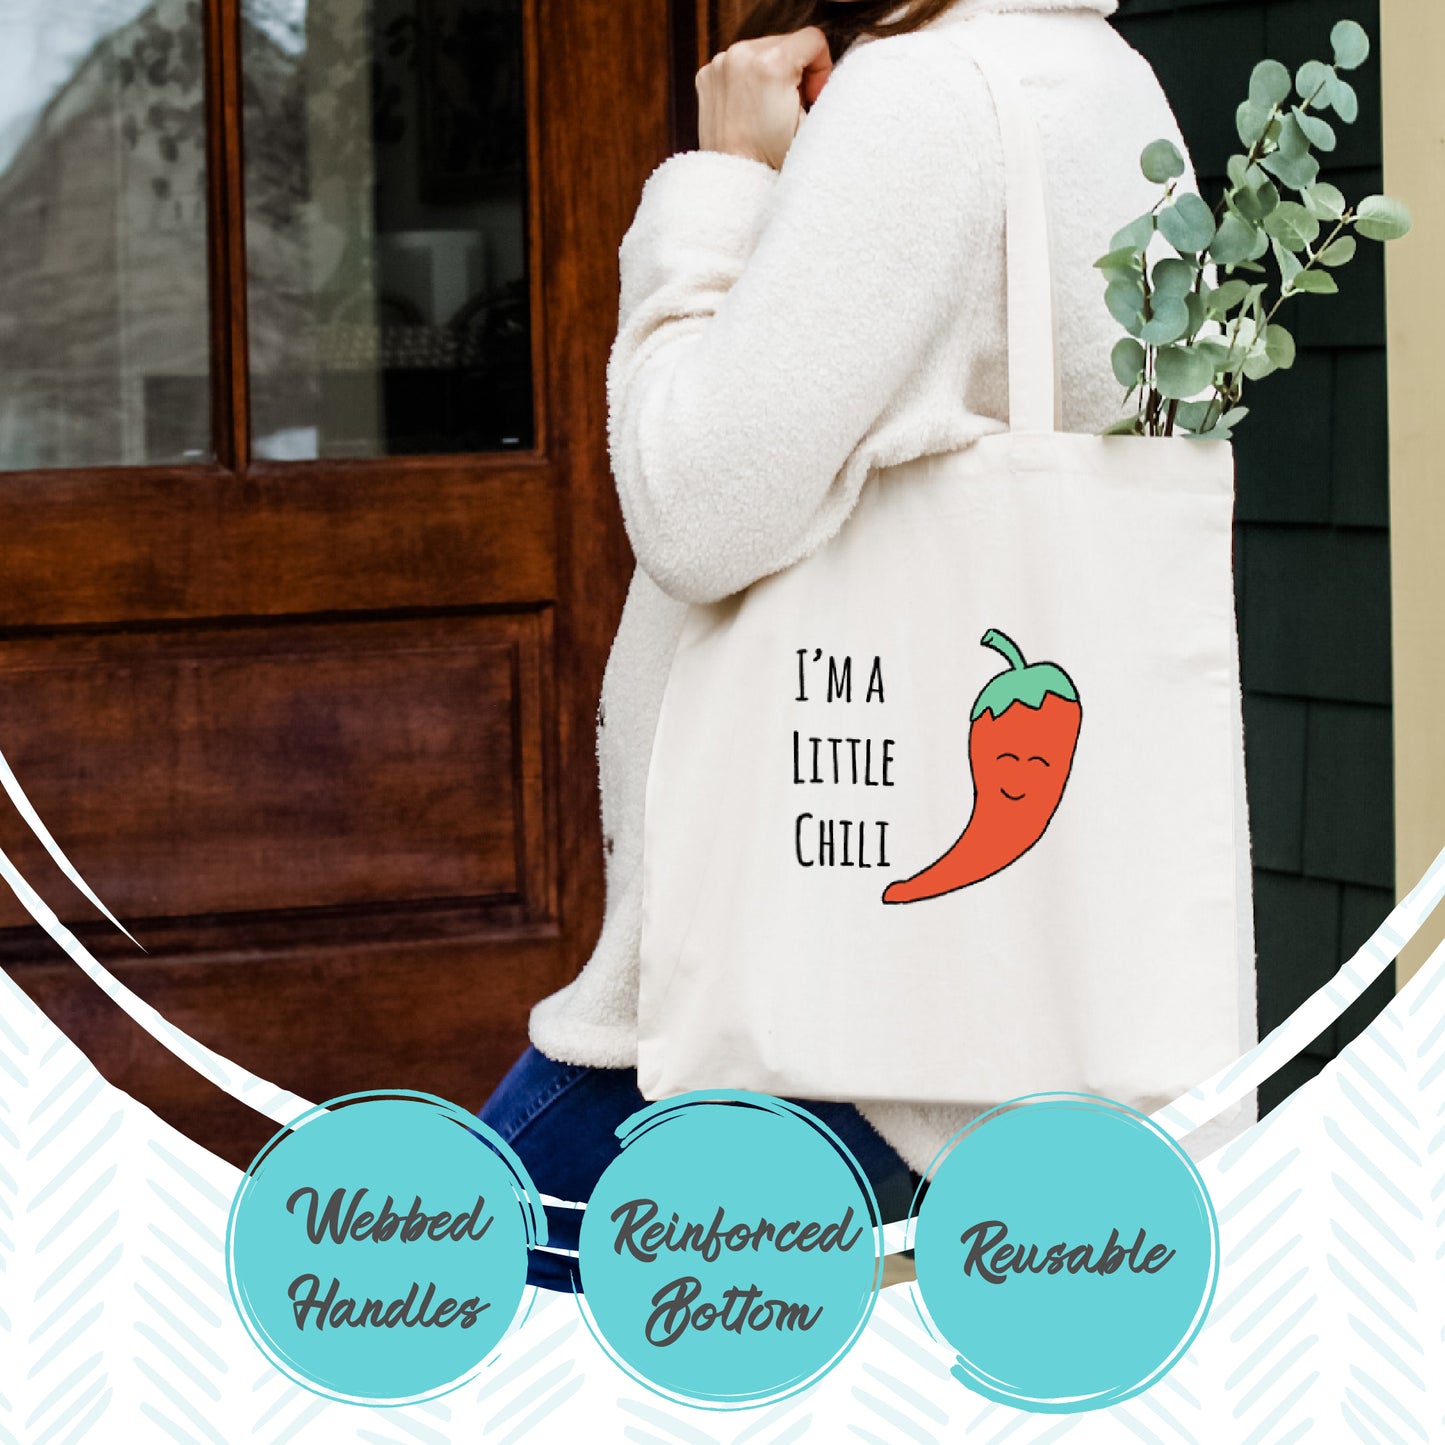 I Don't Carrot All - Full Color Tote - MoonlightMakers